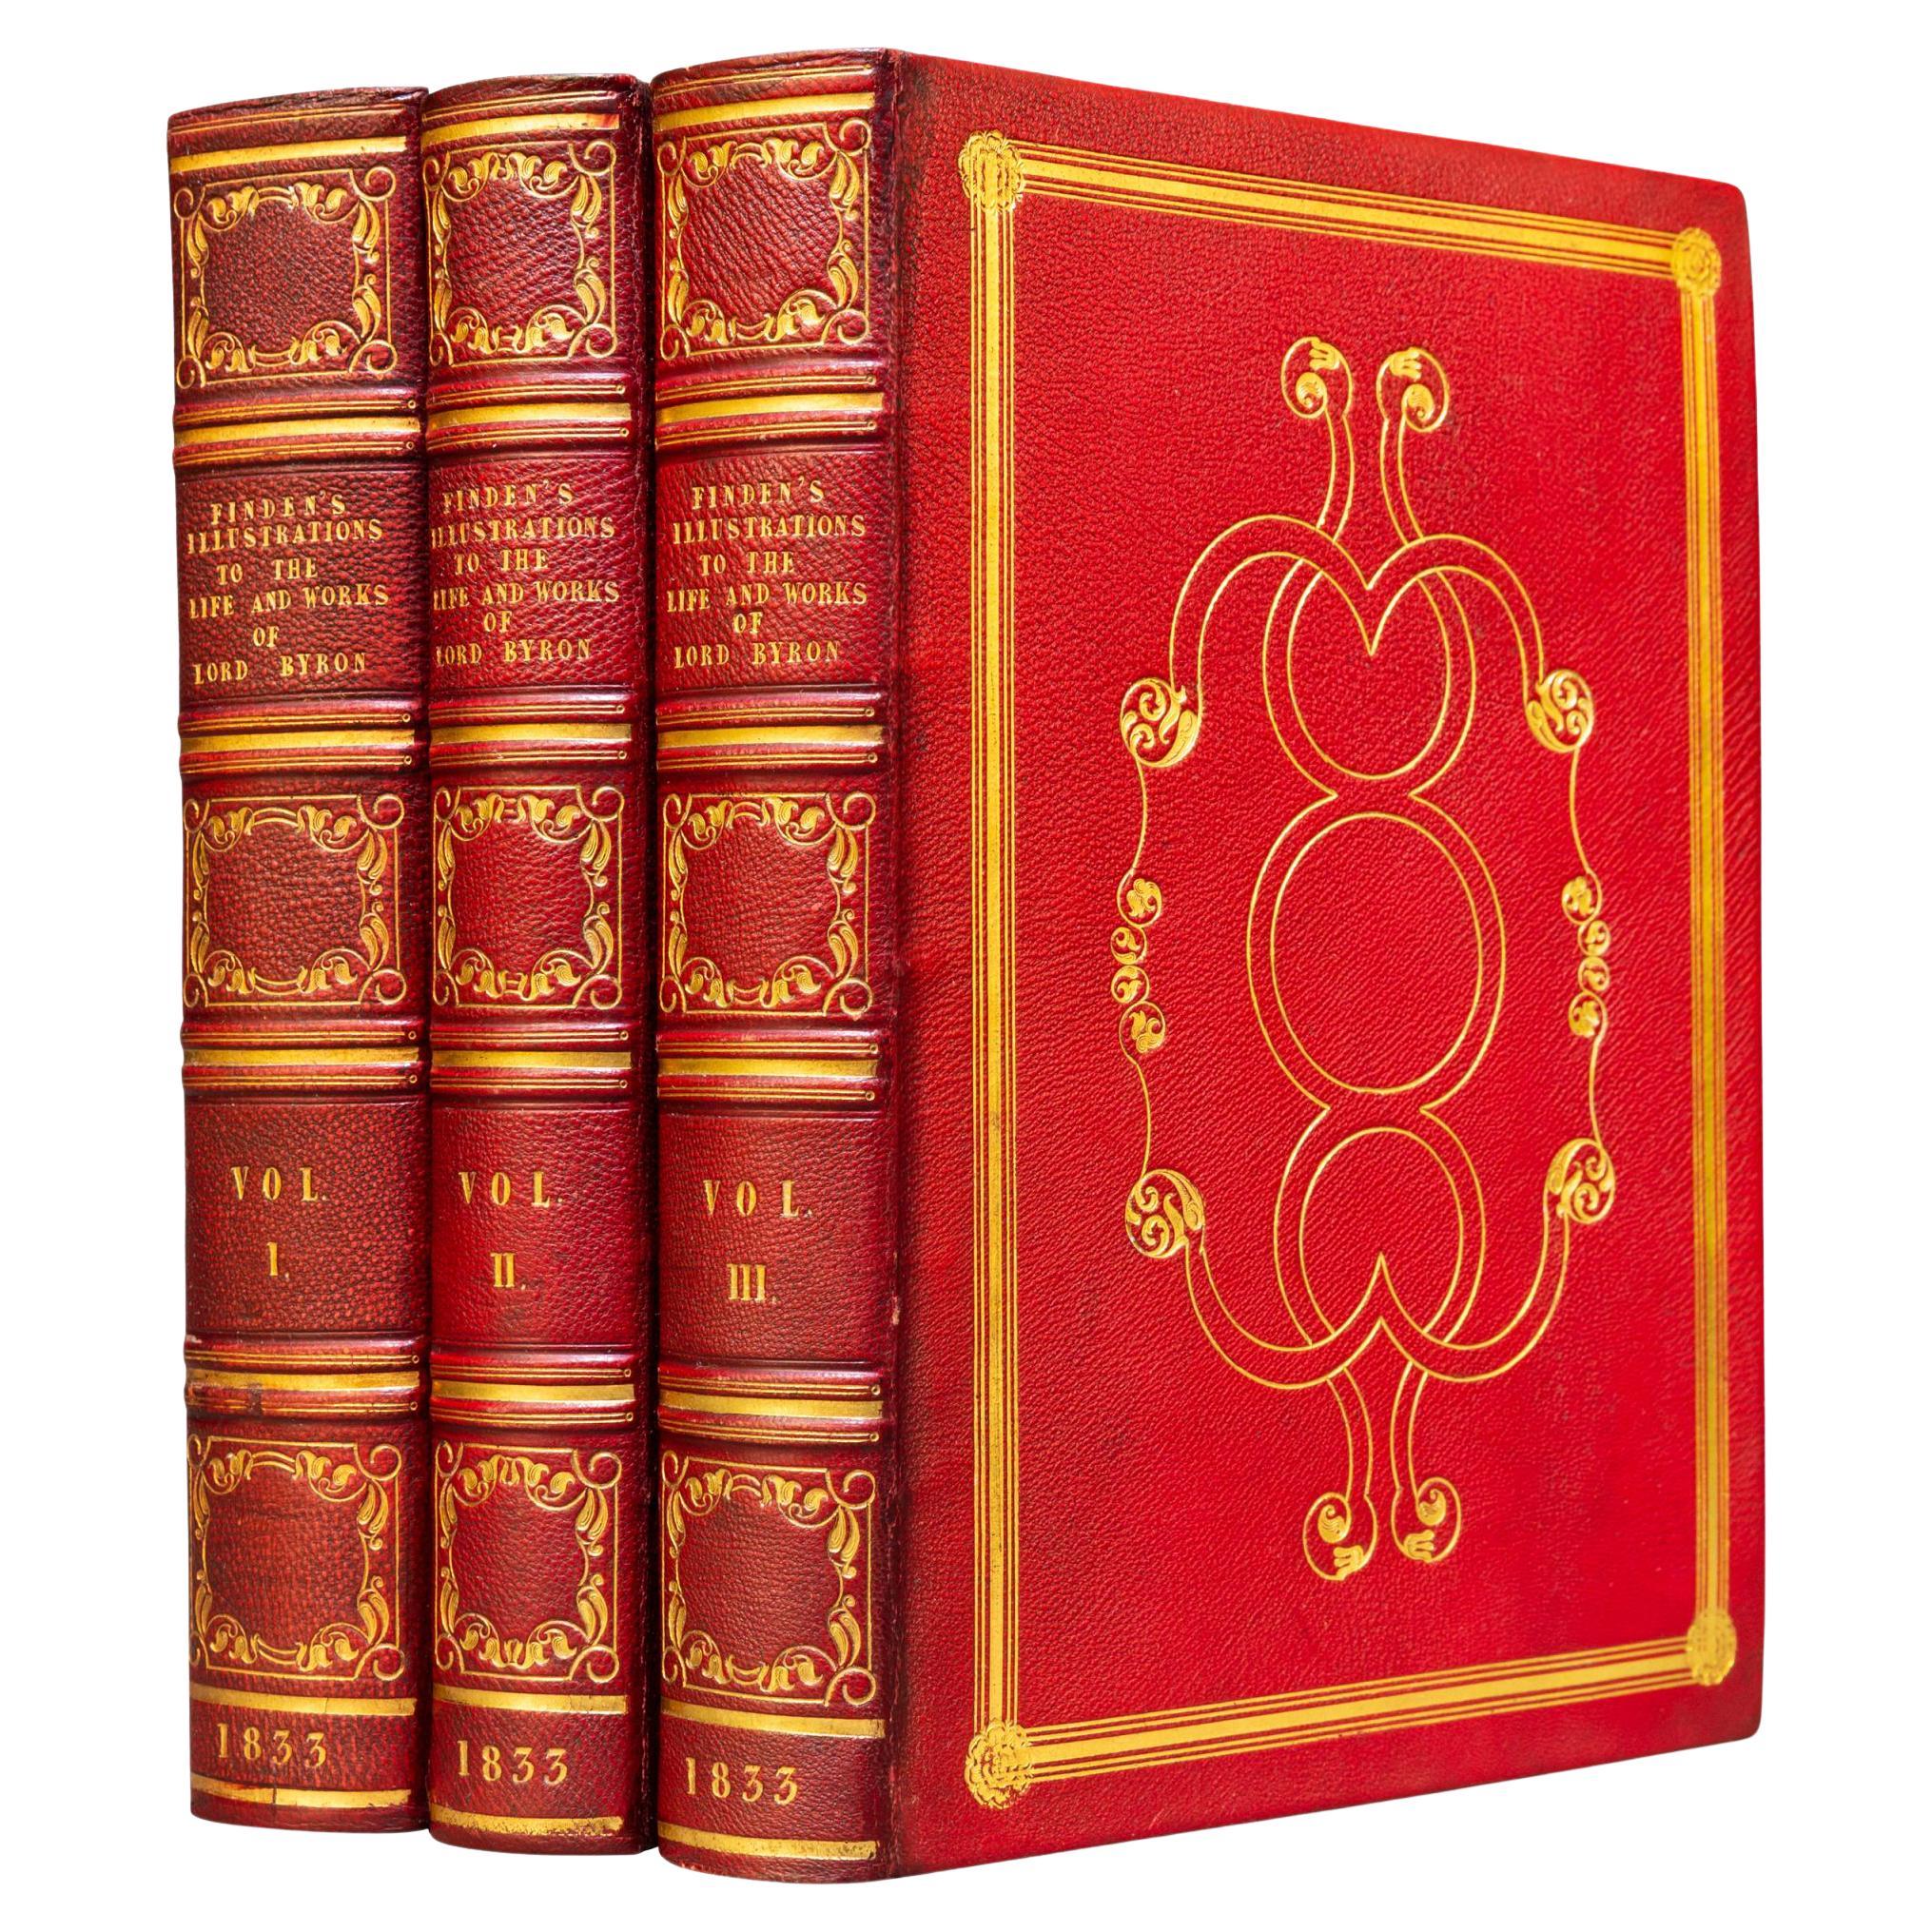 'Book Sets' 3 Volumes, William Brockedon, Life & Works of Lord Byron